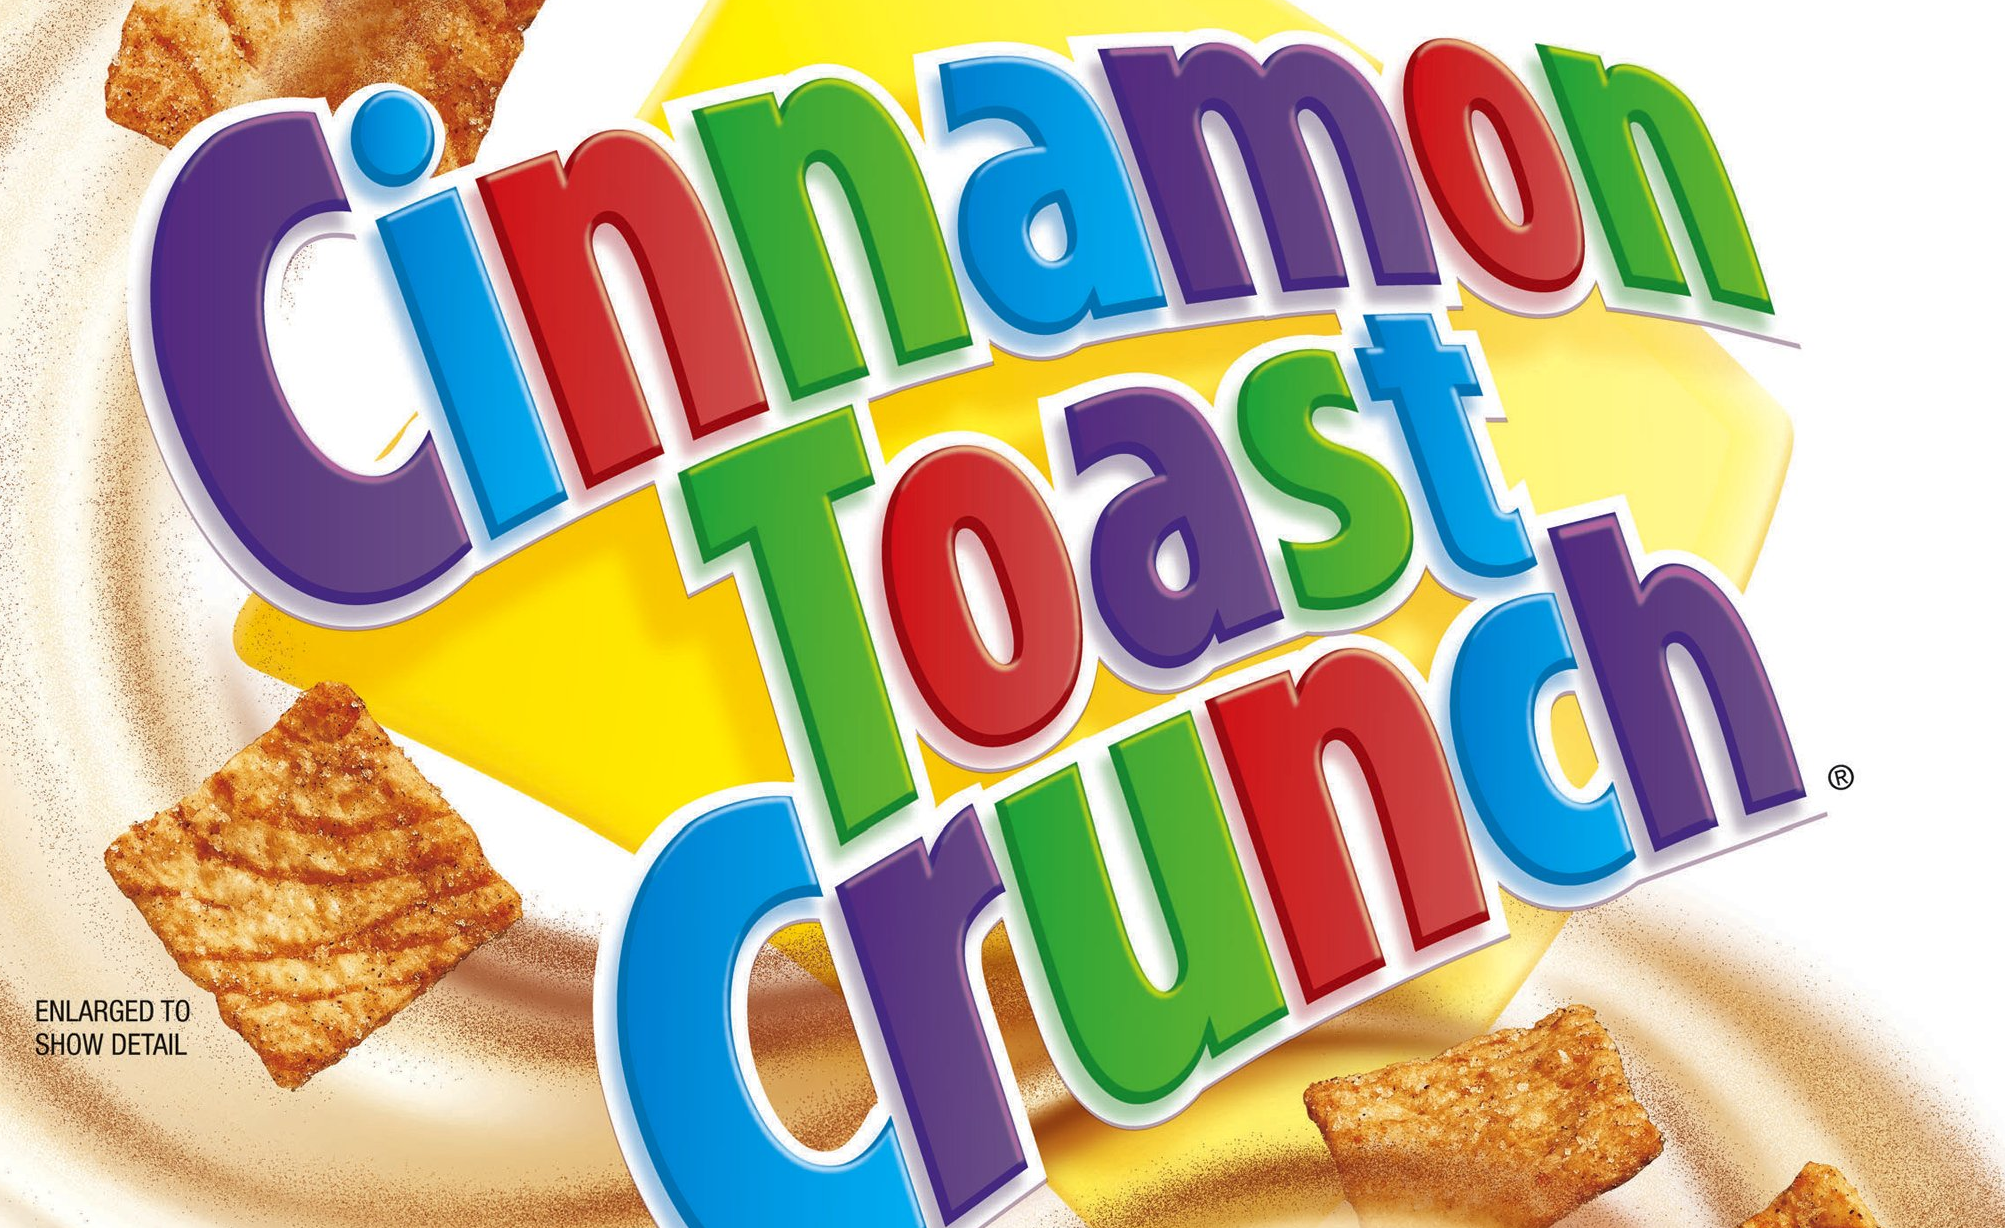 CinnaFuego Toast Crunch Gives New Meaning To Hot Cereal  Dieline   Design Branding  Packaging Inspiration